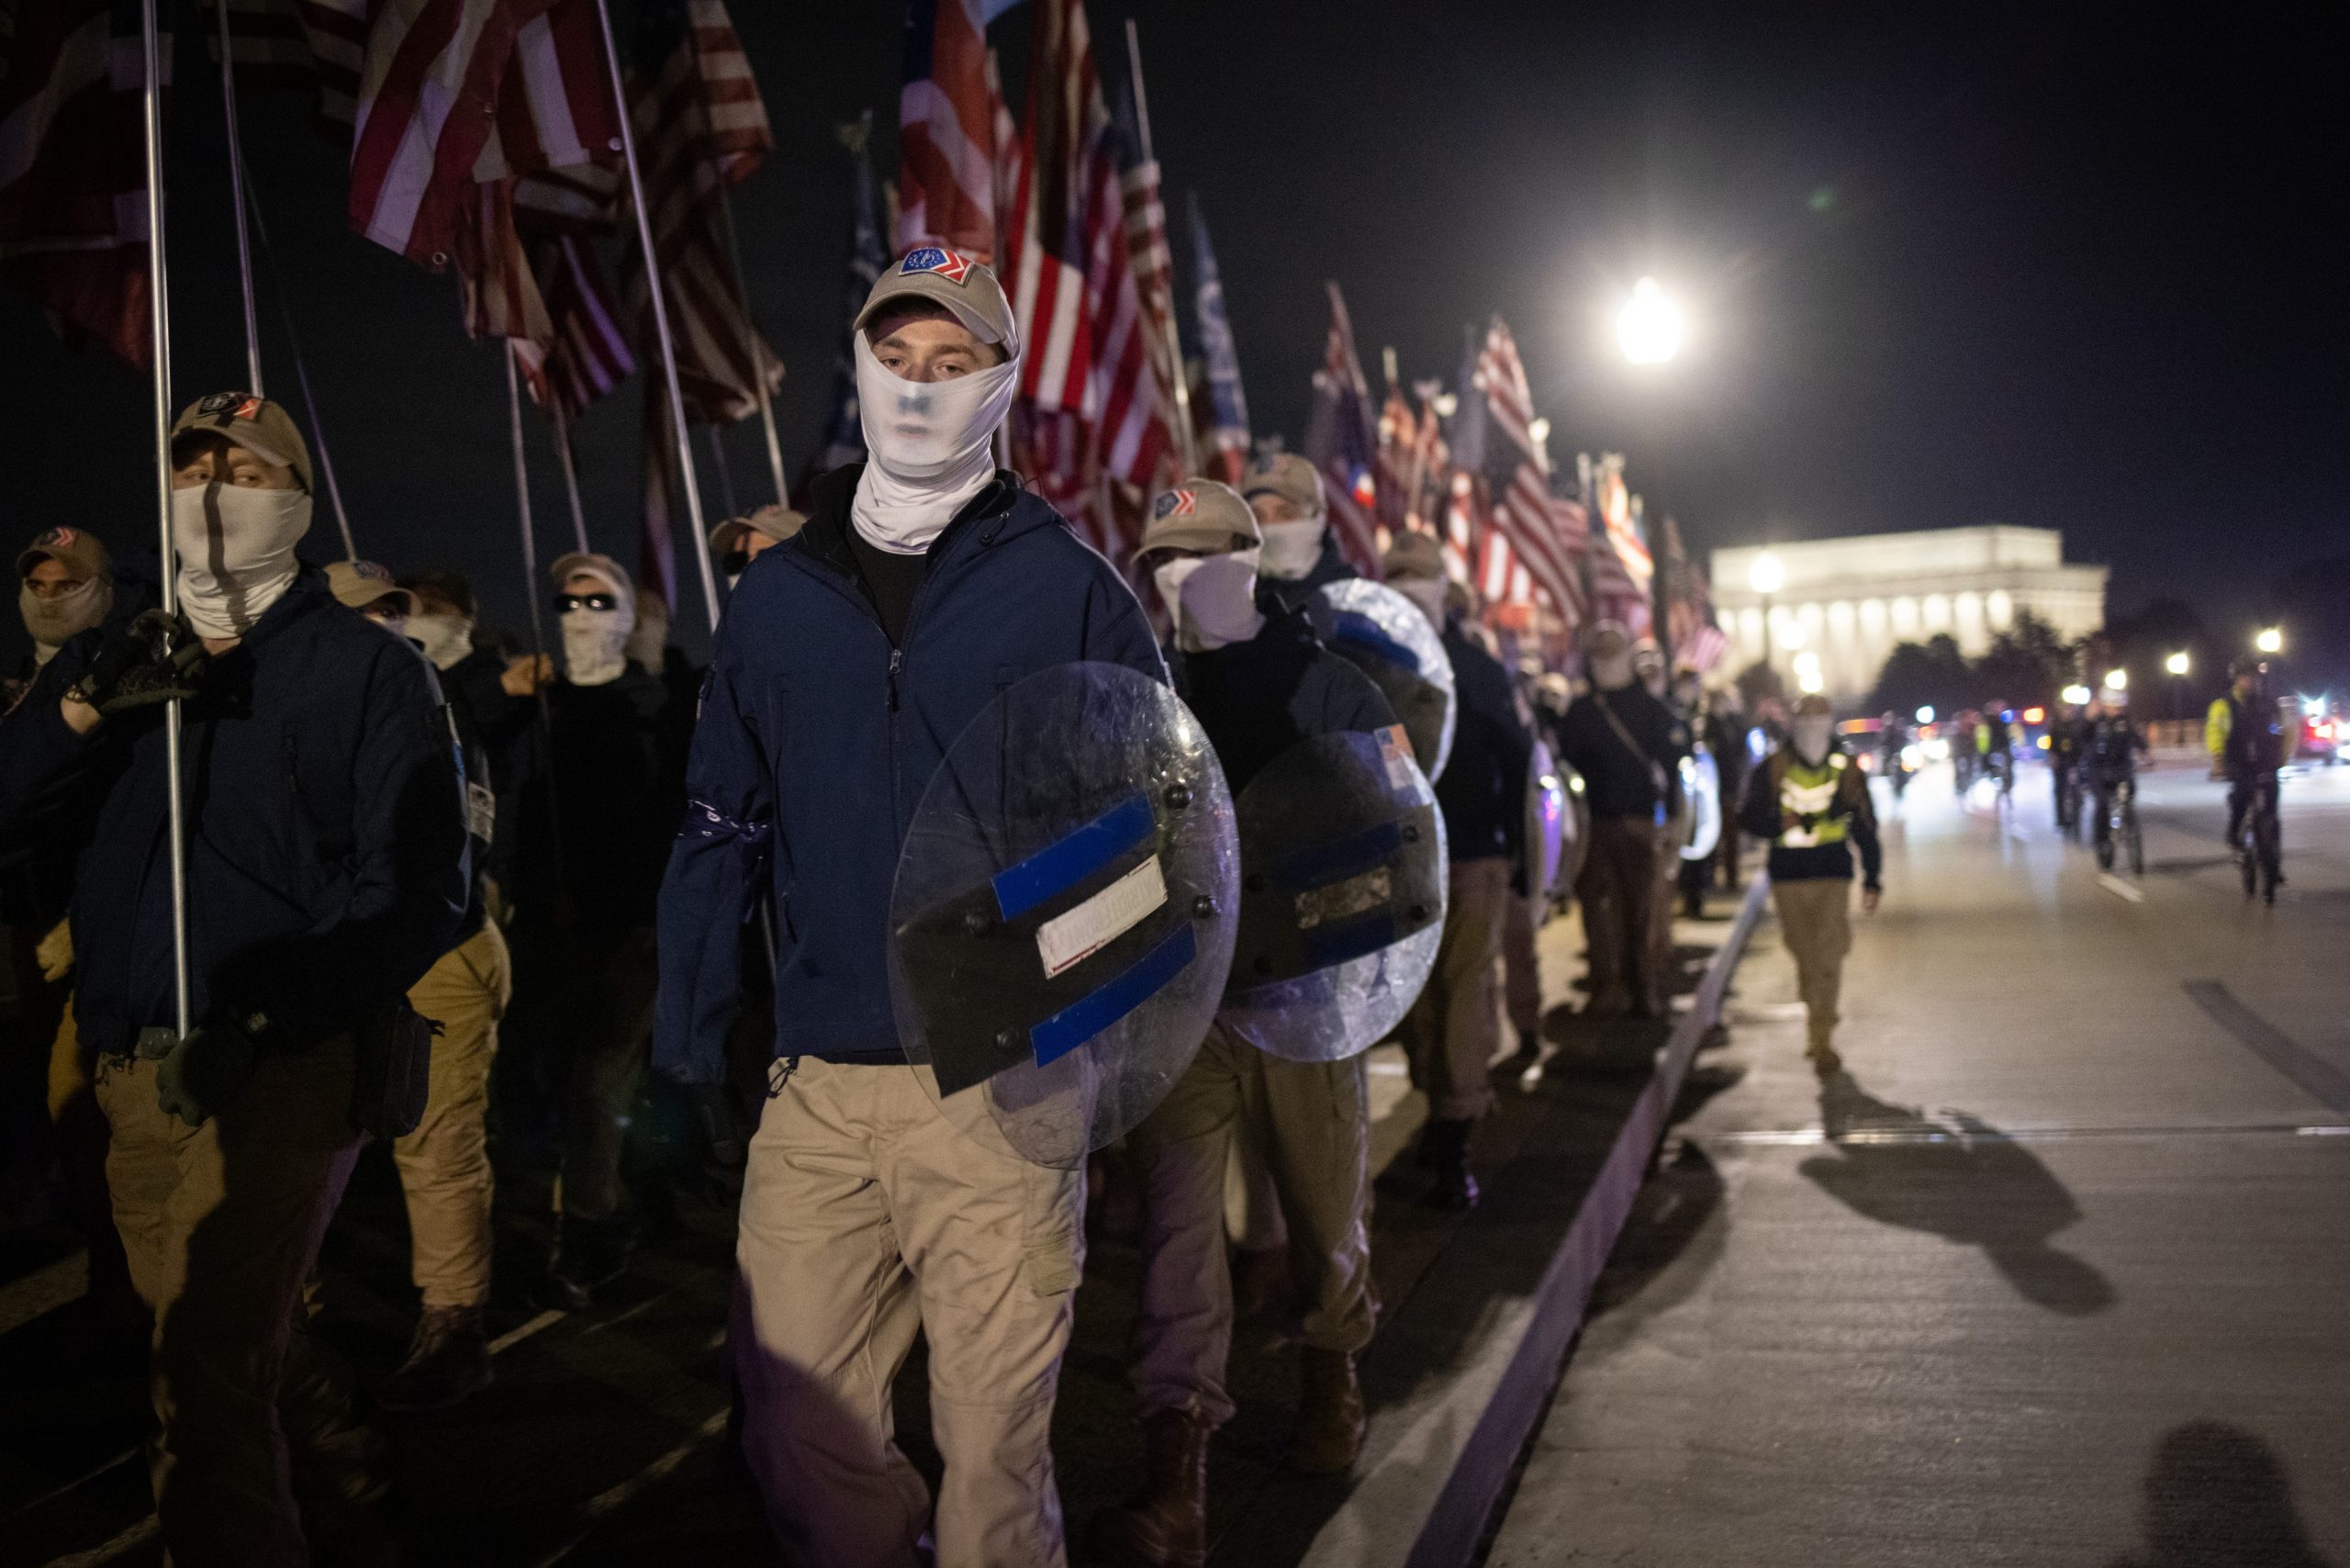 Members of the right-wing group Patriot Front march across Memorial Bridge in front of the Lincoln Memorial on December 04, 2021 in Washington, DC.